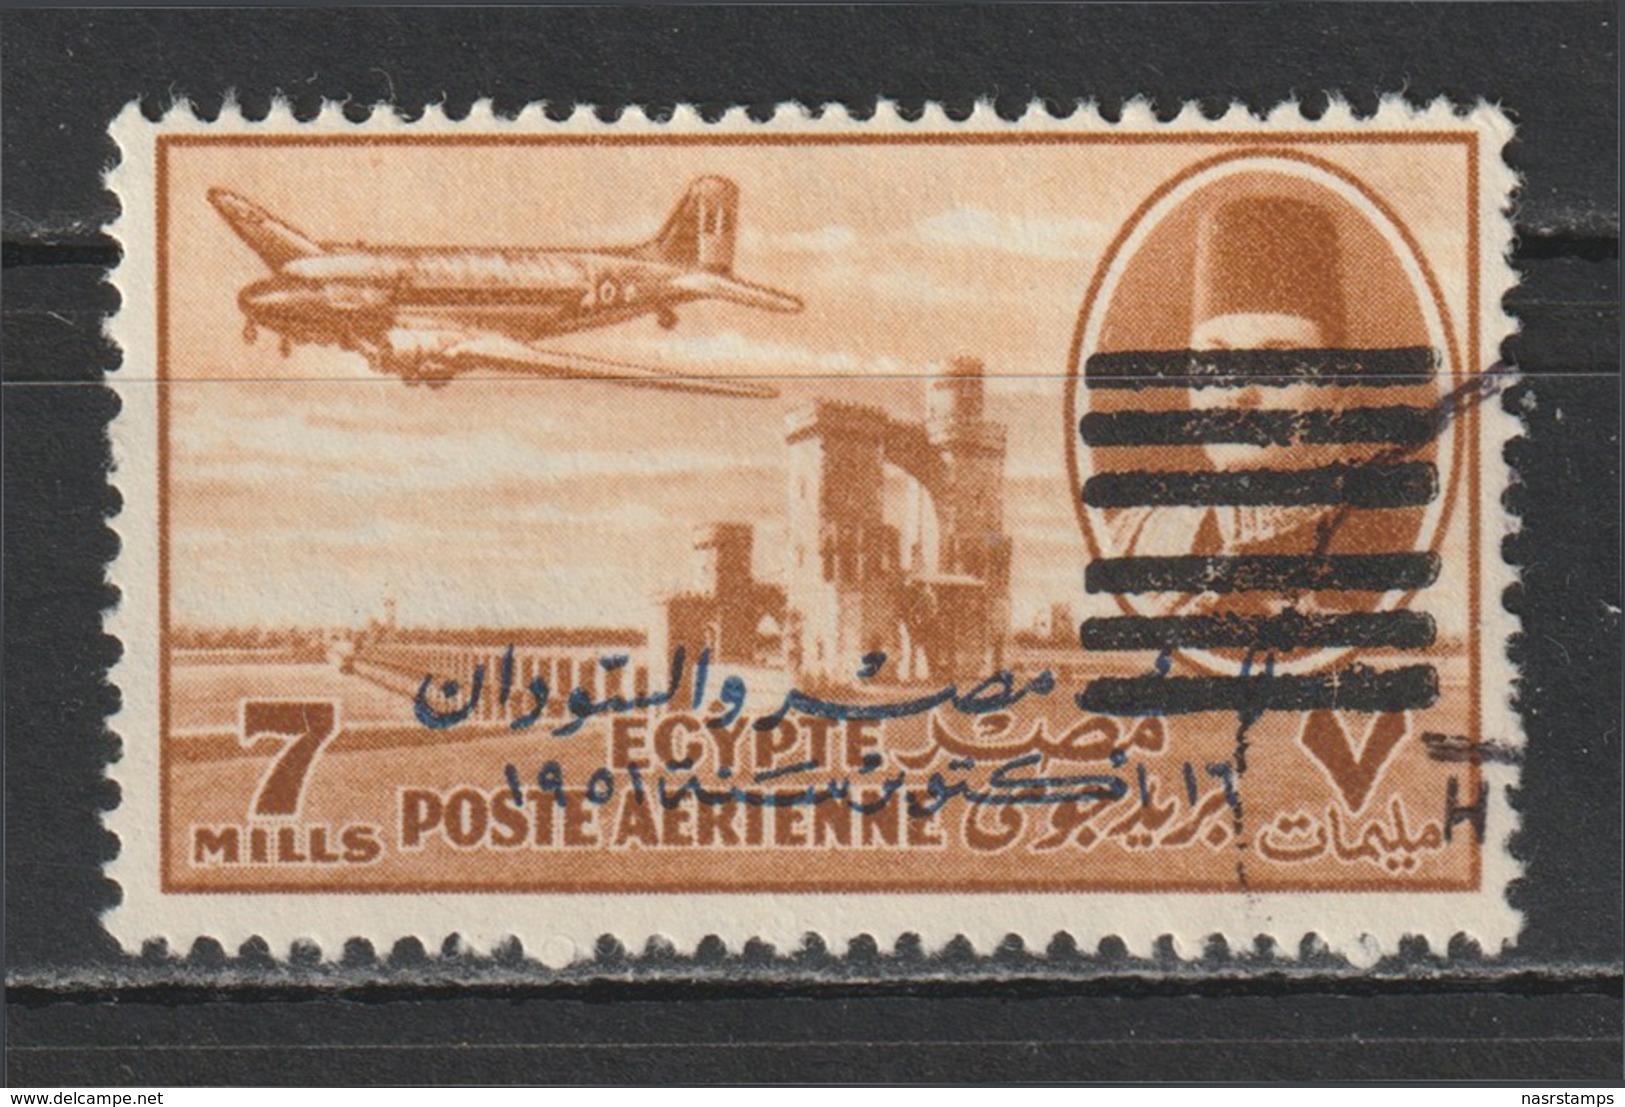 Egypt - 1953 - Unlisted - Unrecorded - Scarce - ( King Farouk - Overprinted 6 Bars On M/s - 7m  ) - Used - No Gum - Gebraucht